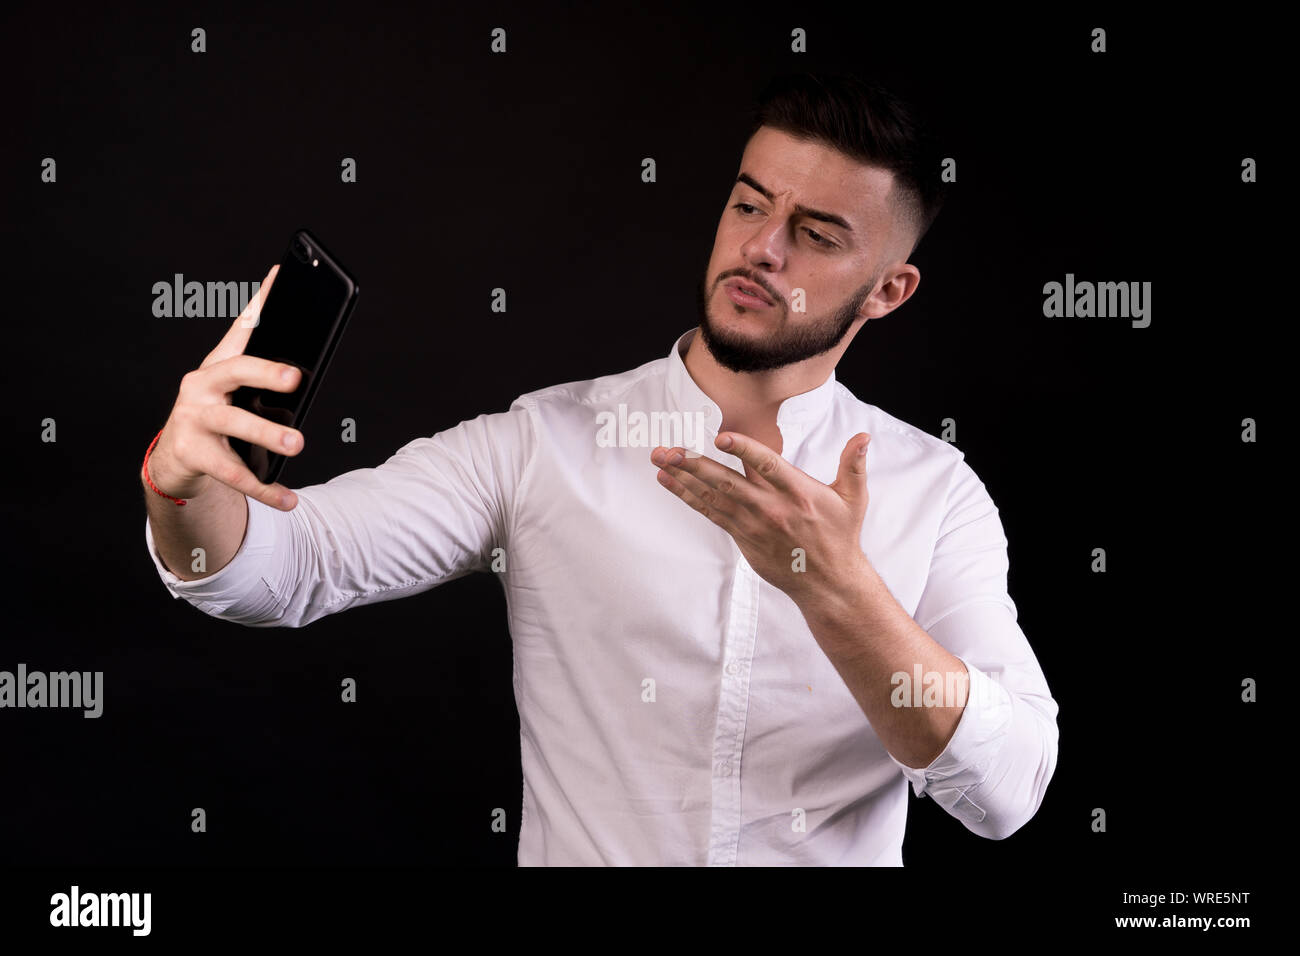 Business man taking selfie from phone on black background. Concept - video dialogue. Stock Photo